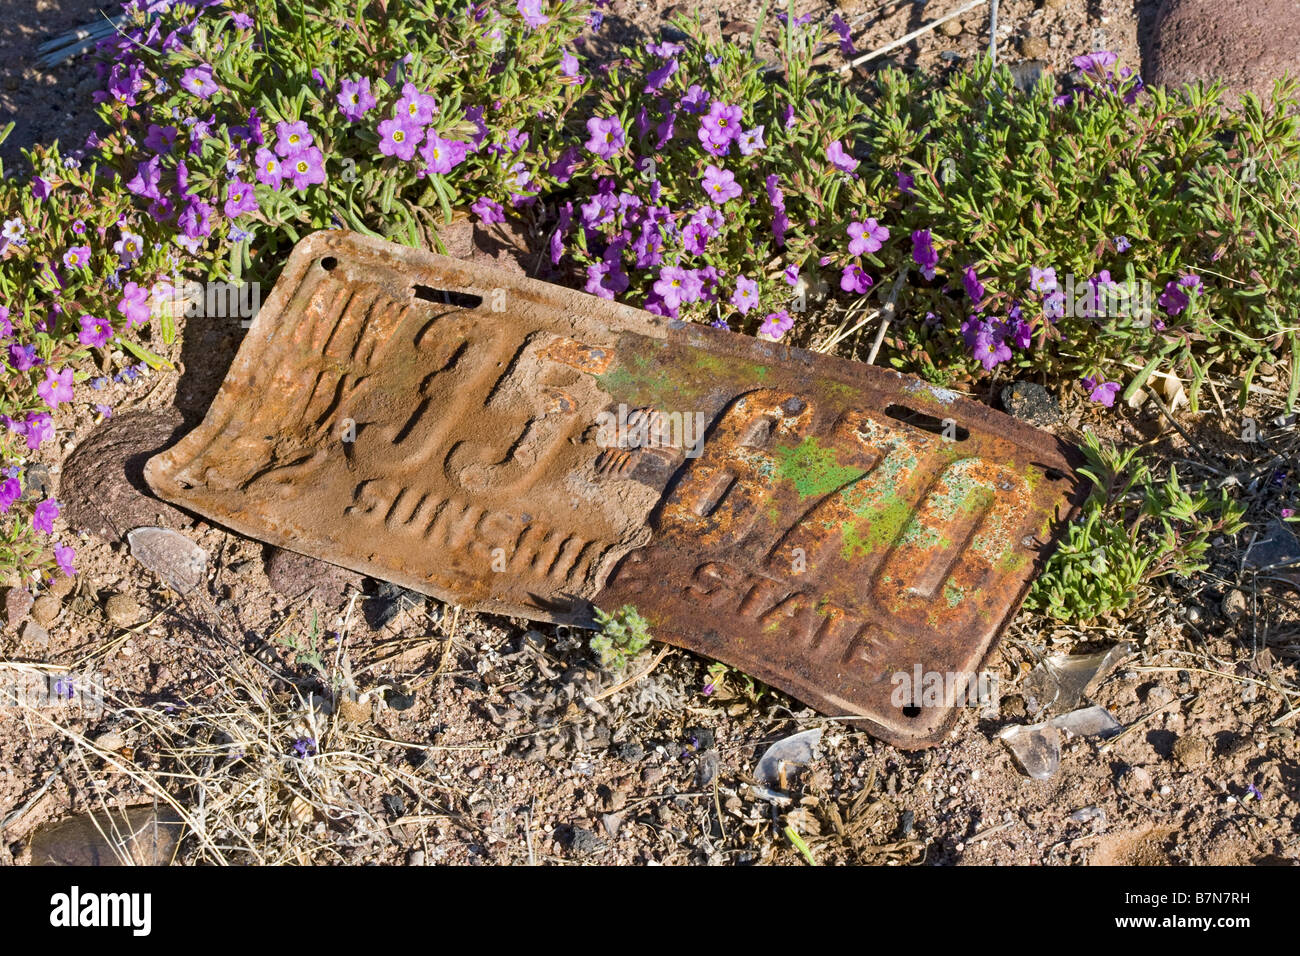 License plate and flowers Socorro New Mexico United States Stock Photo